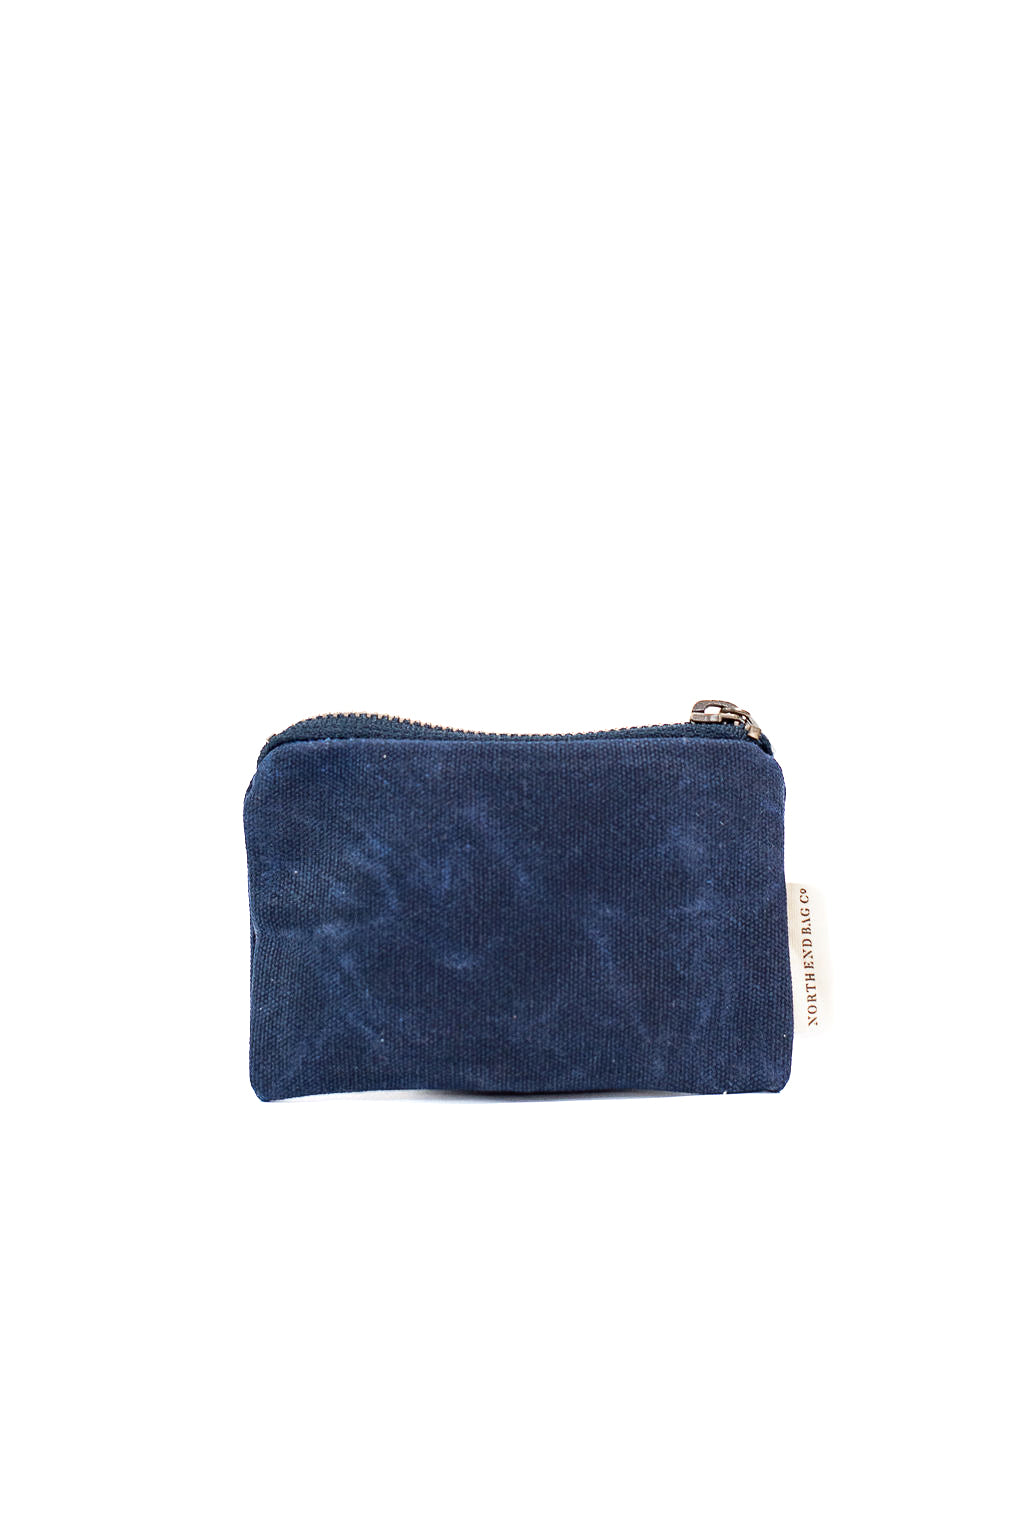 Navy Coin Pouch